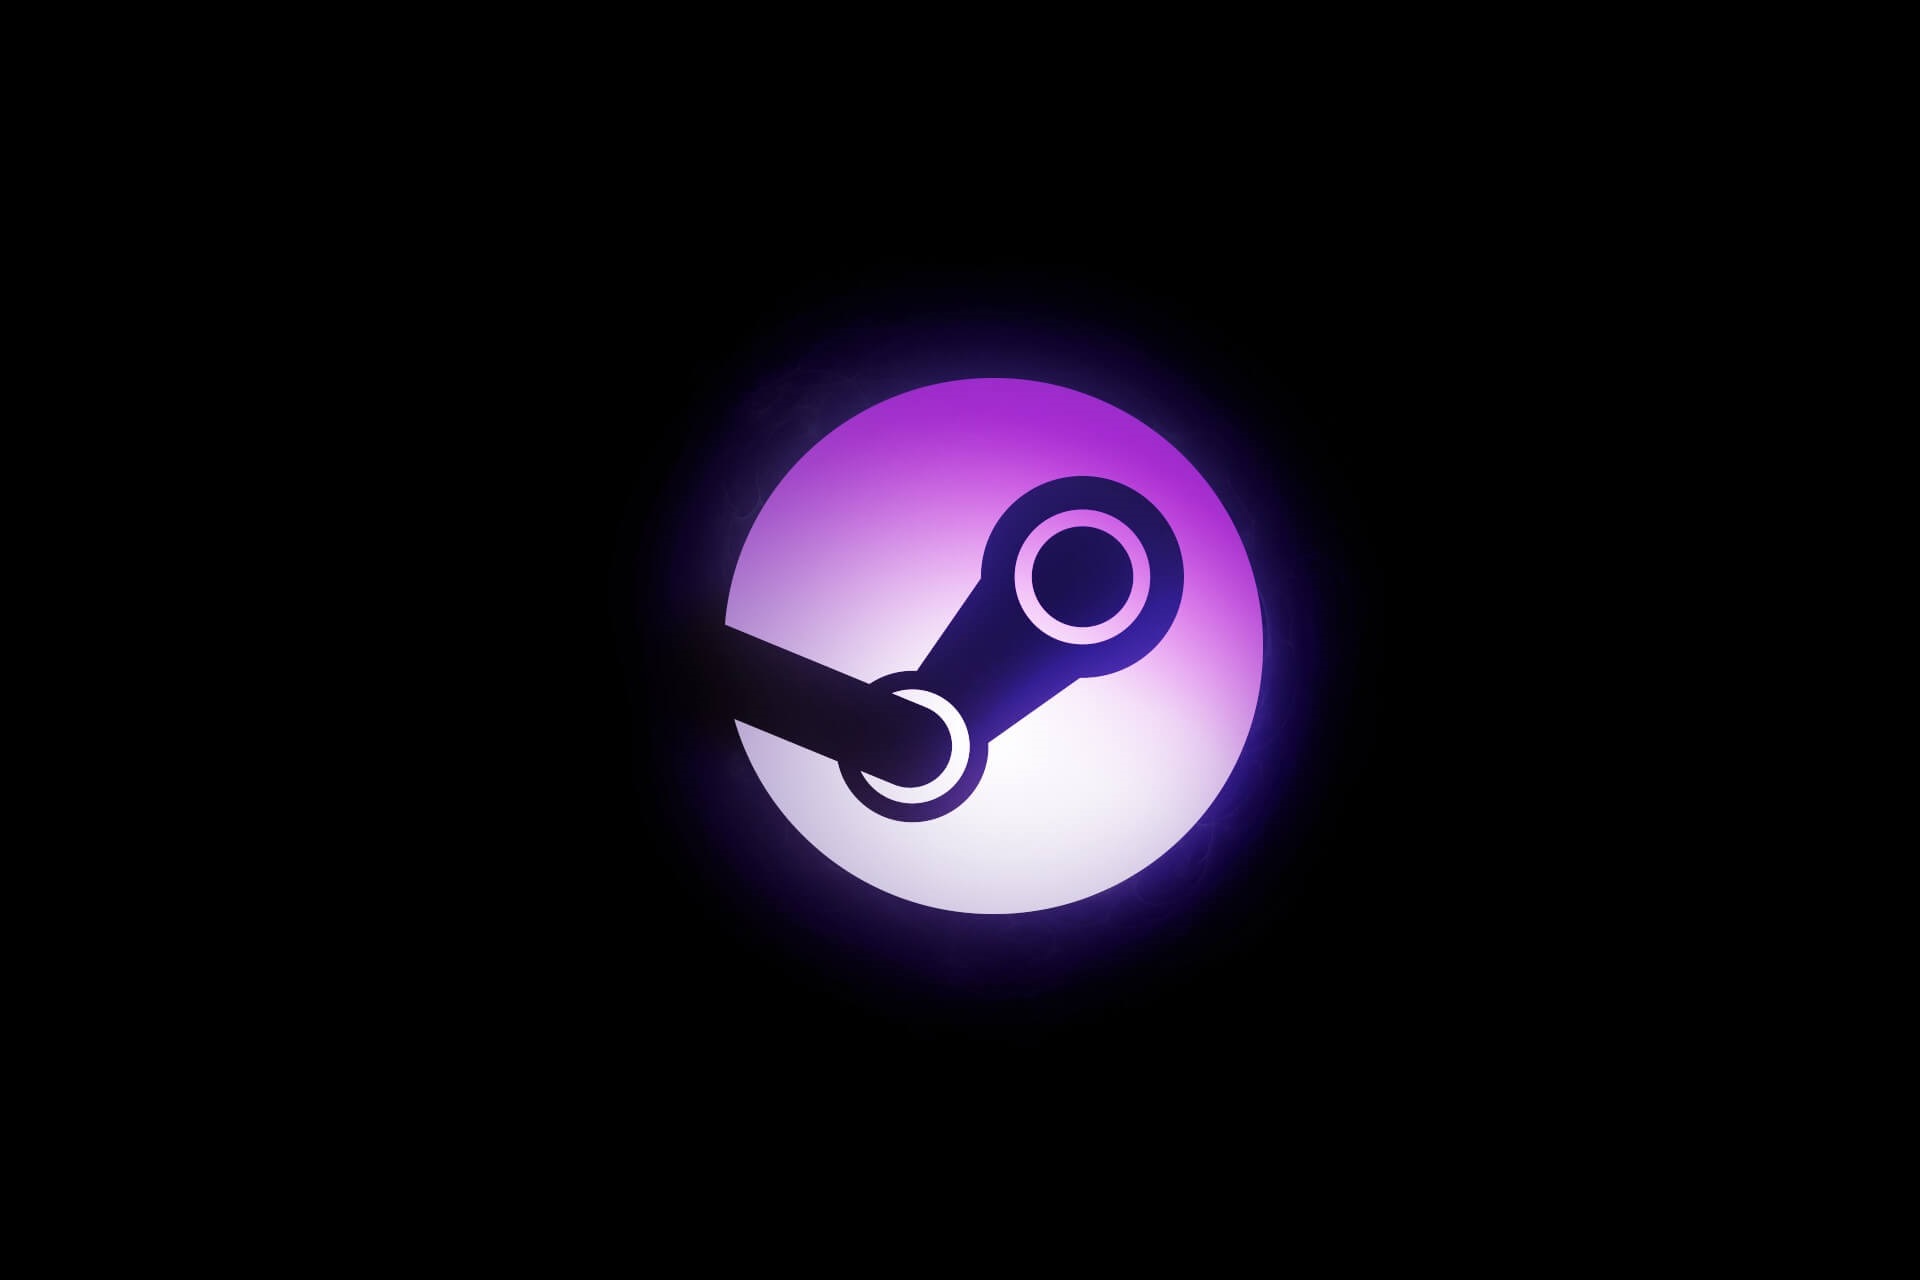 How to launch Steam games in windowed mode